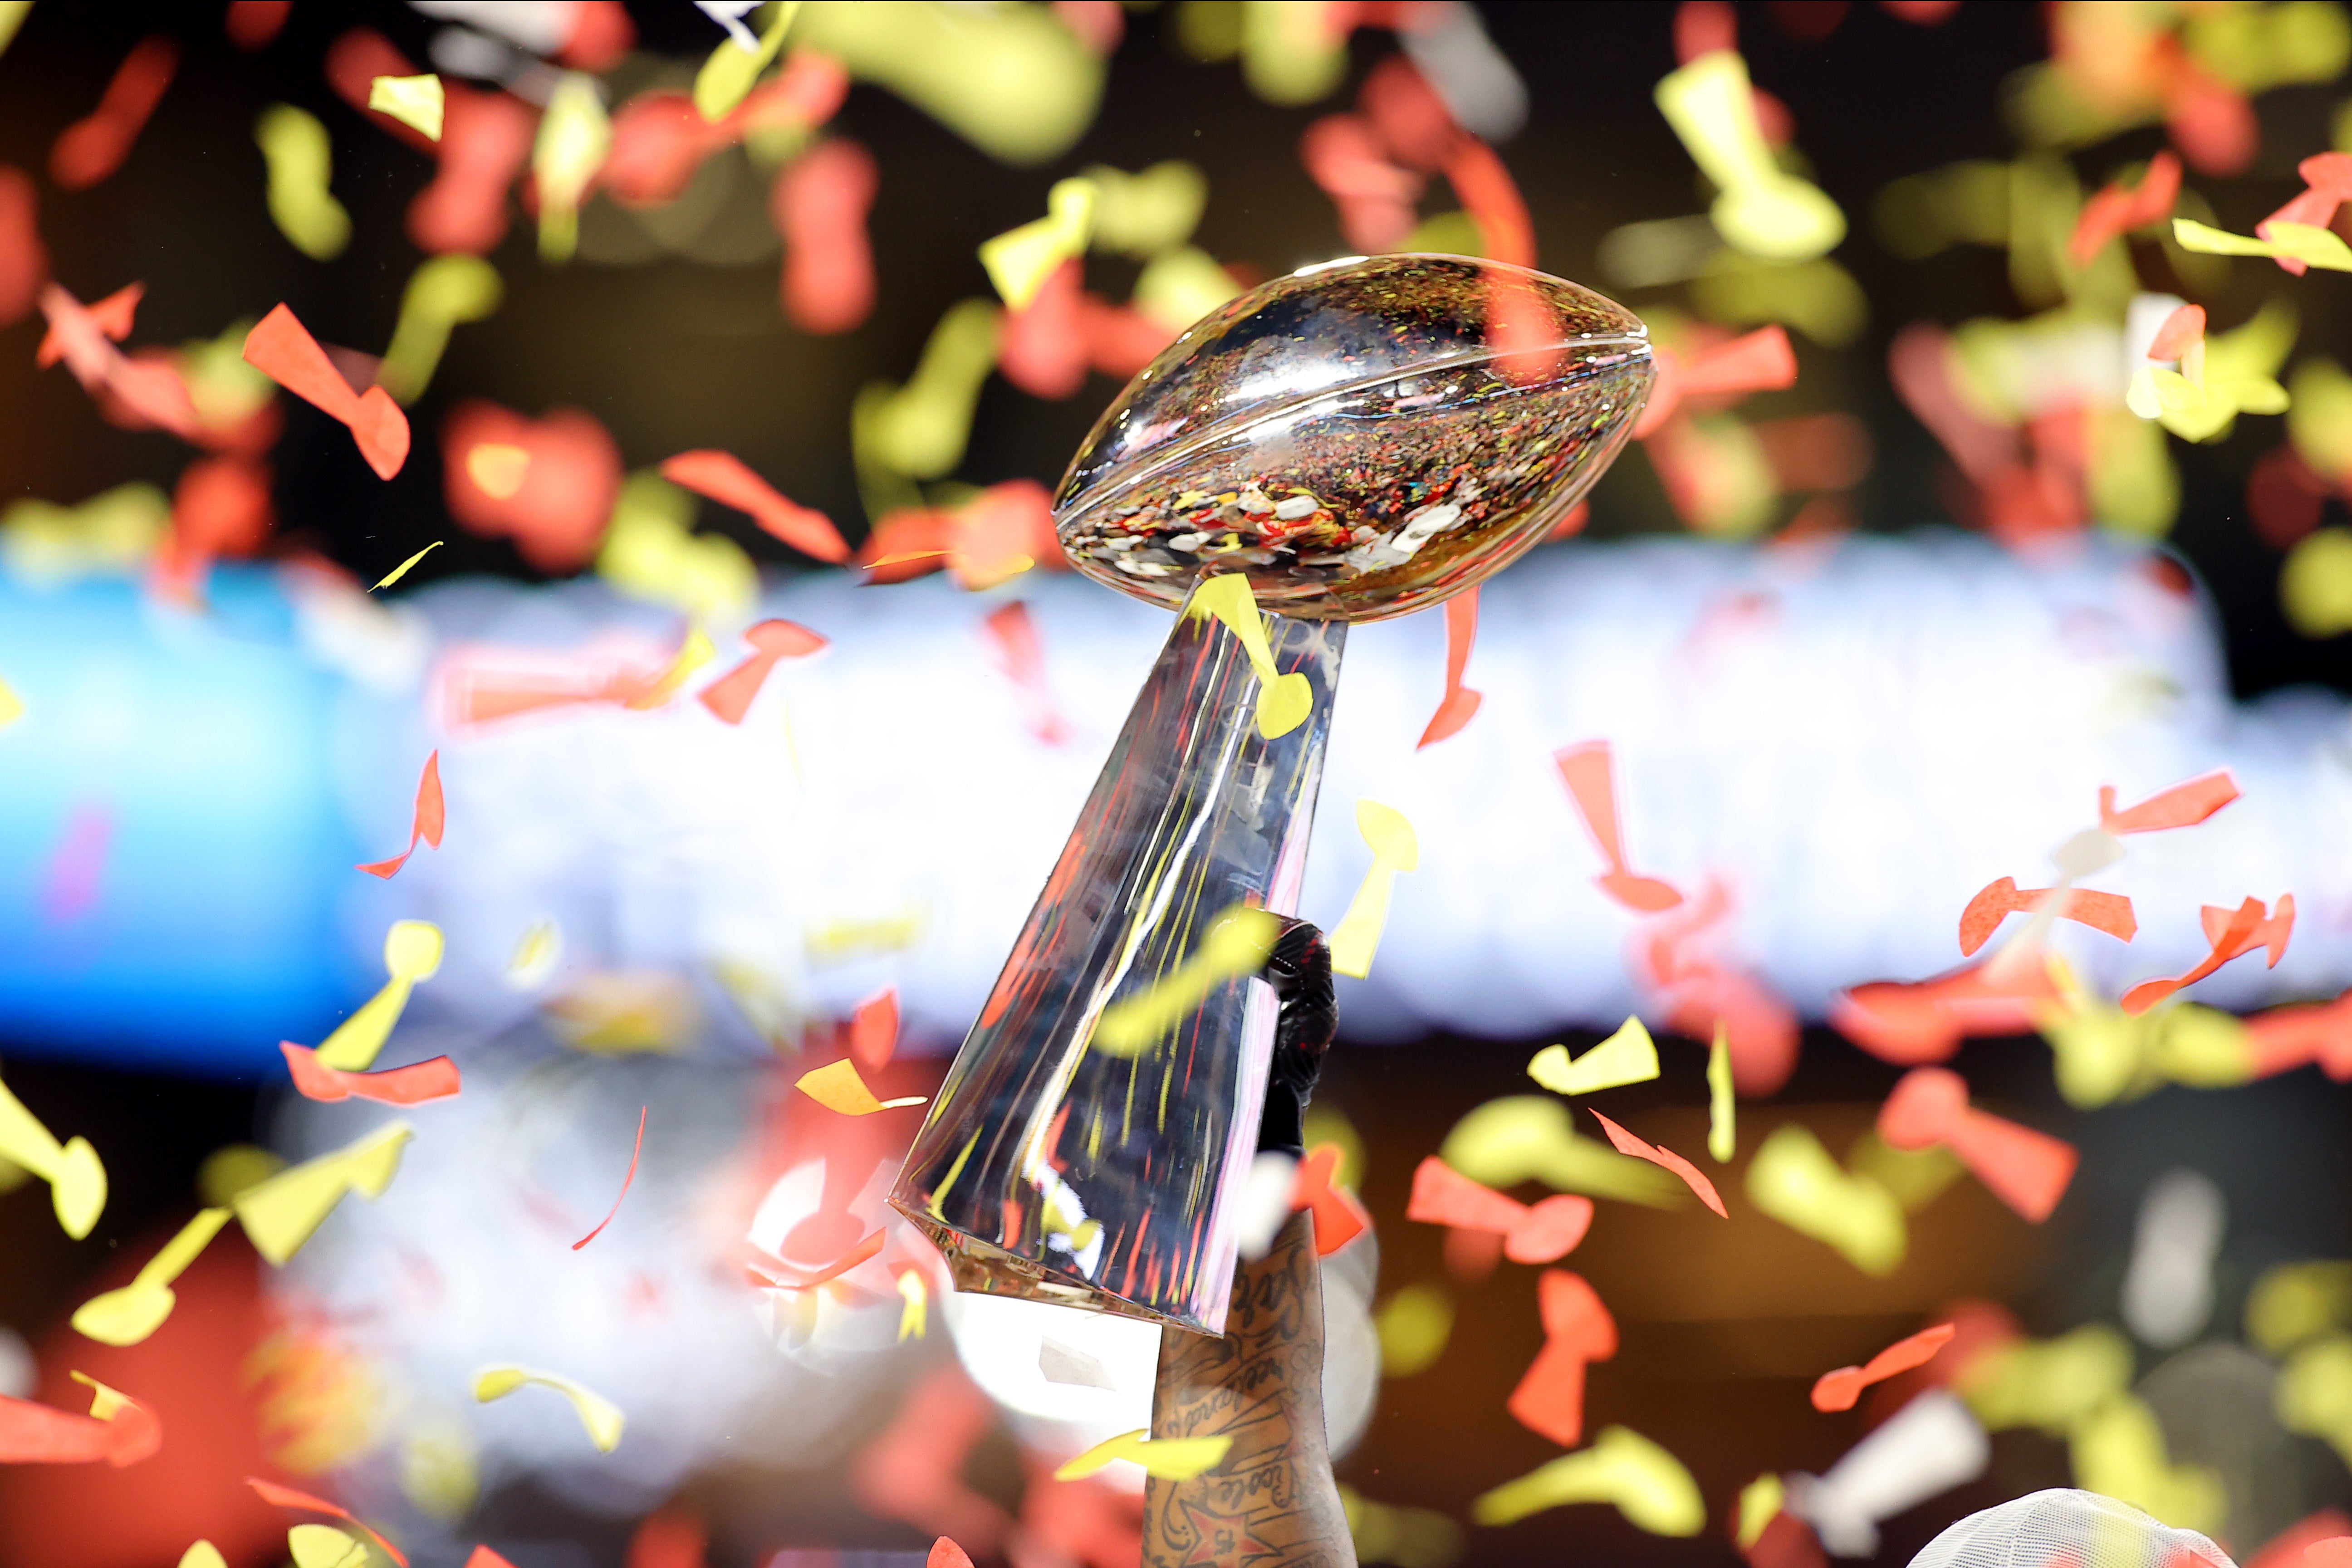 The champions of the AFC and the NFC will vie for the Lombardi Trophy